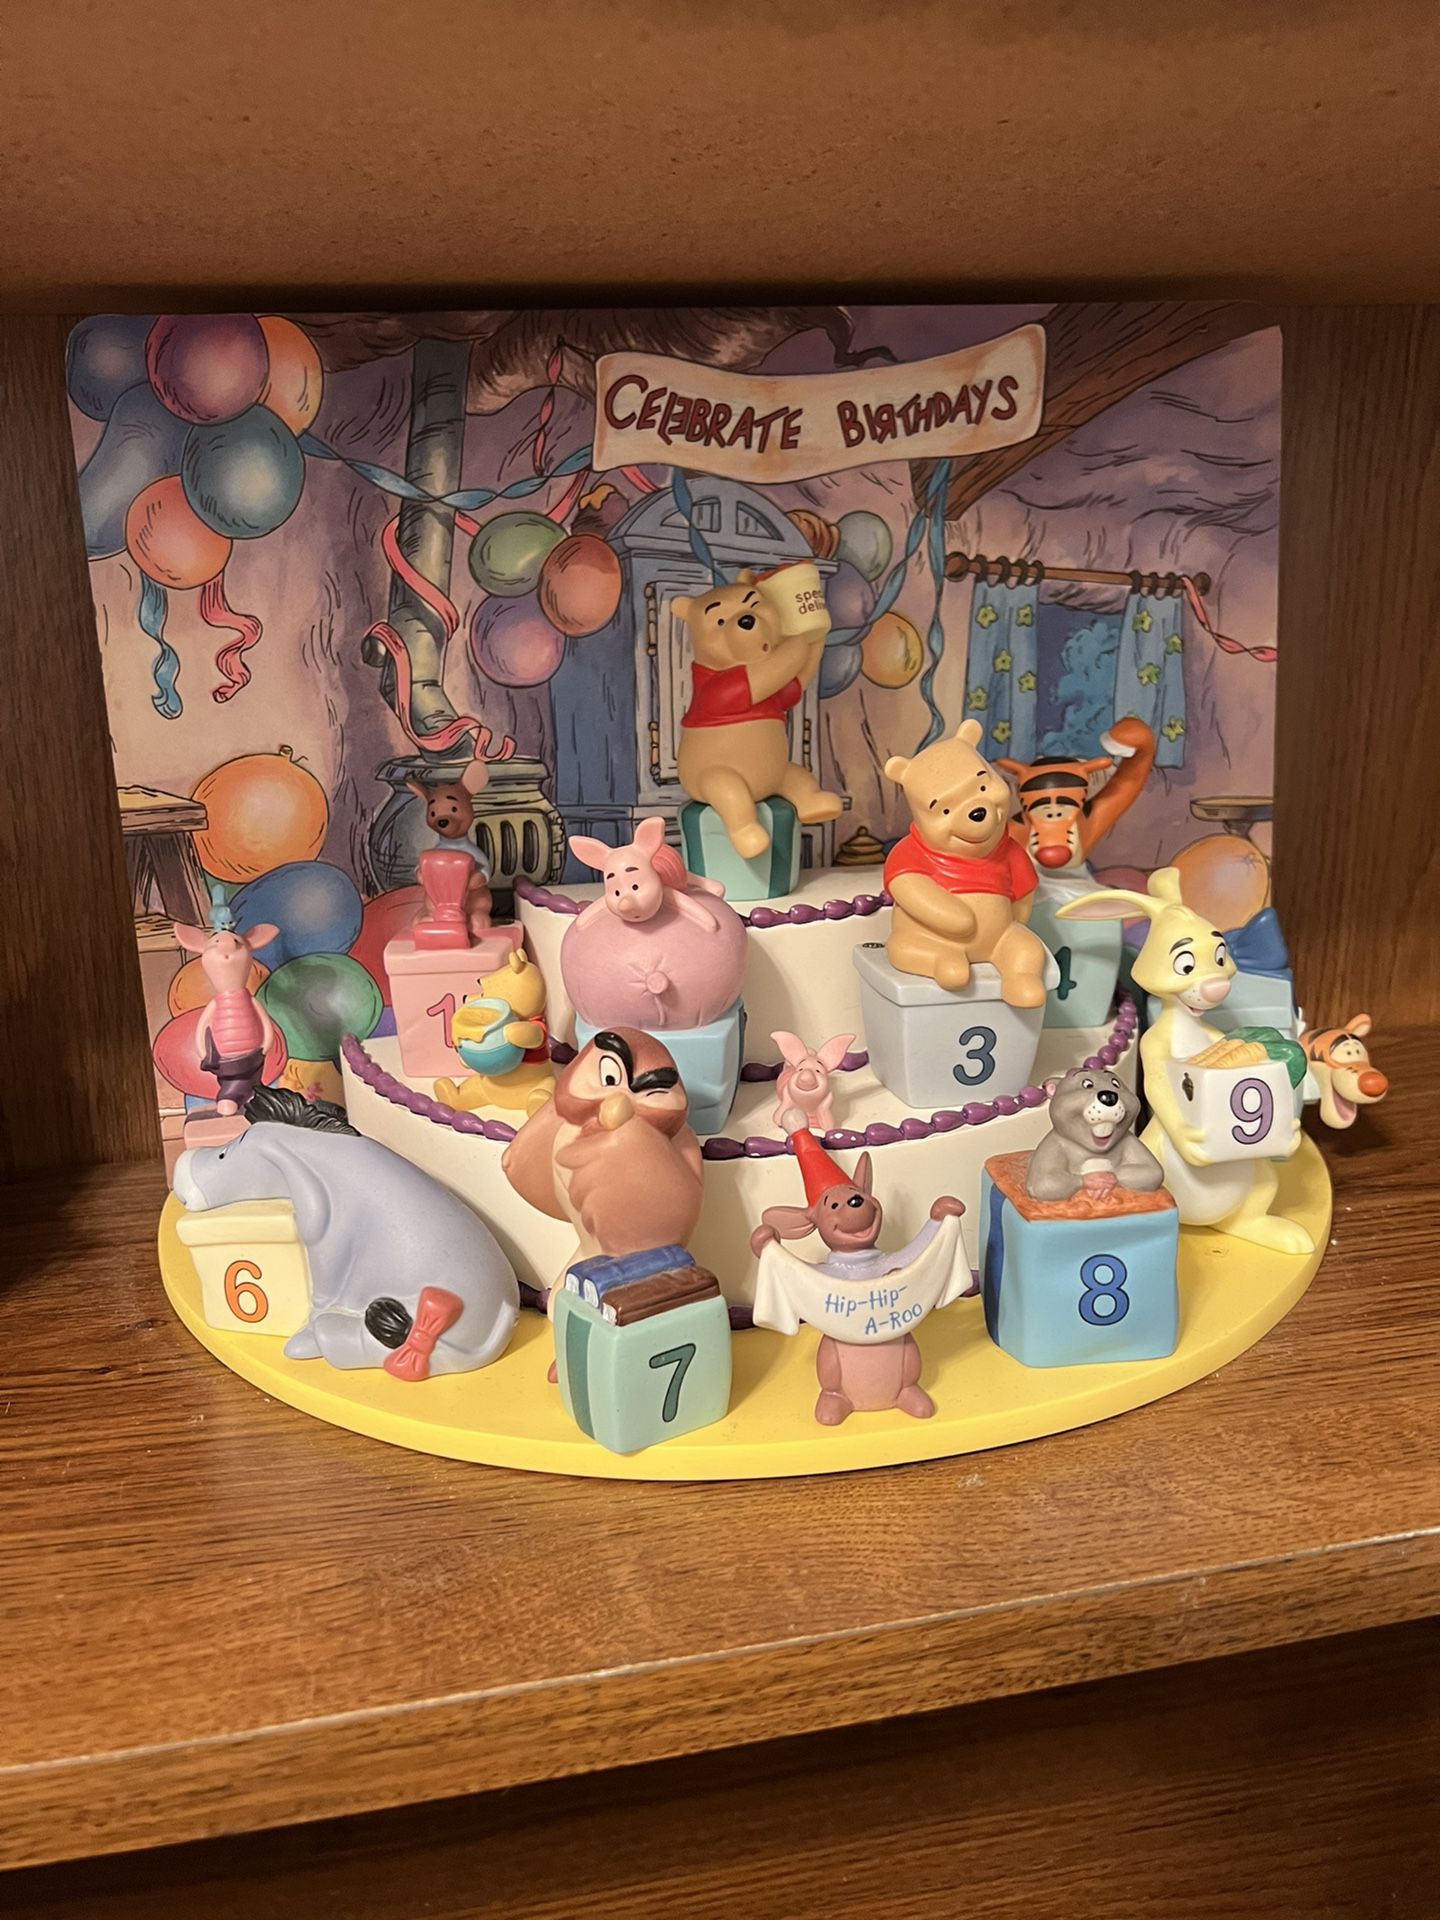 Pooh & Friends Birthday Figurines with cake dispay & back drop